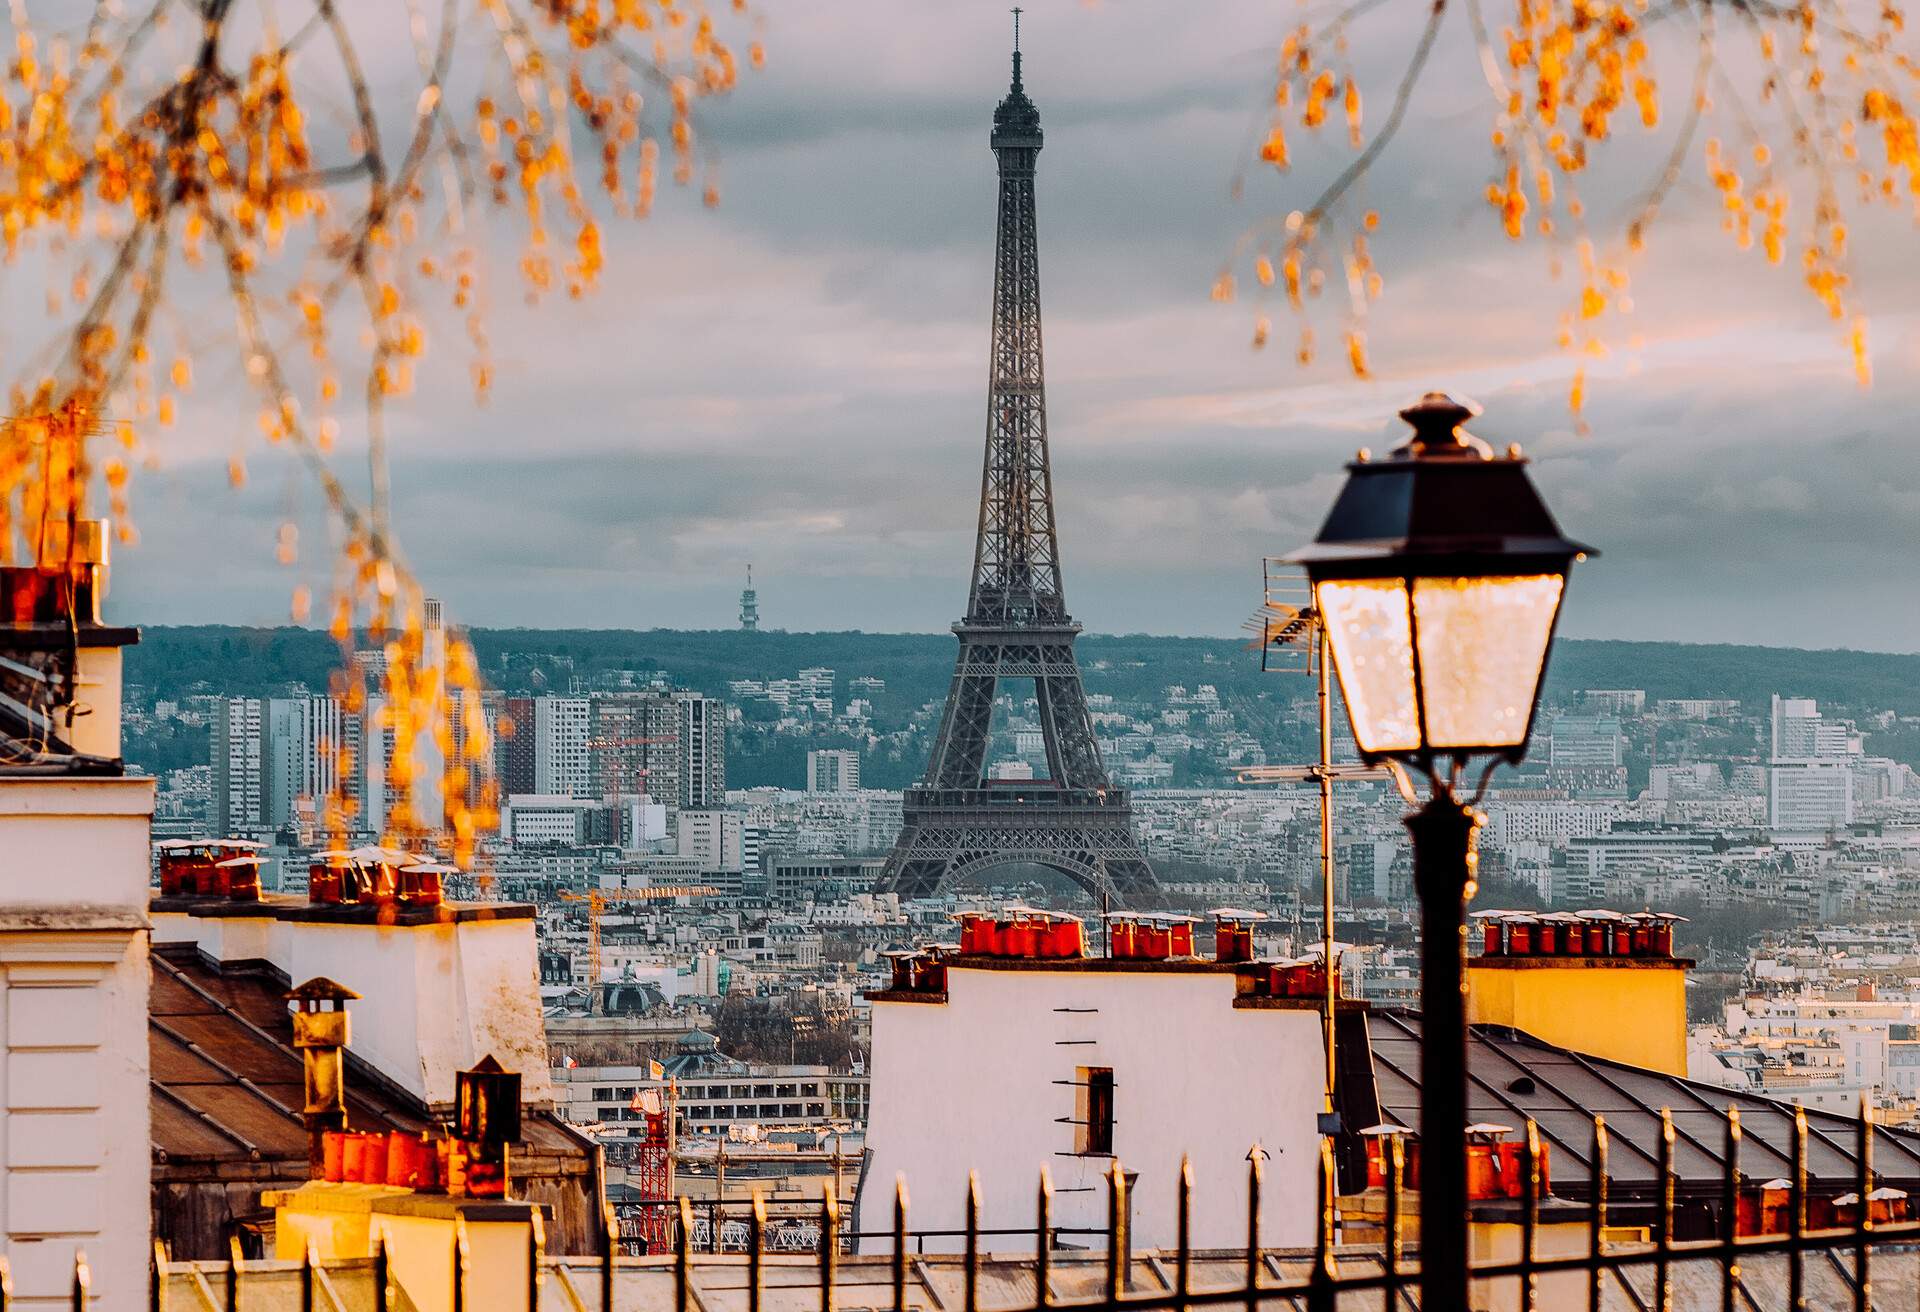 View of Eiffel Tower in Paris, France. Shot during daytime. 